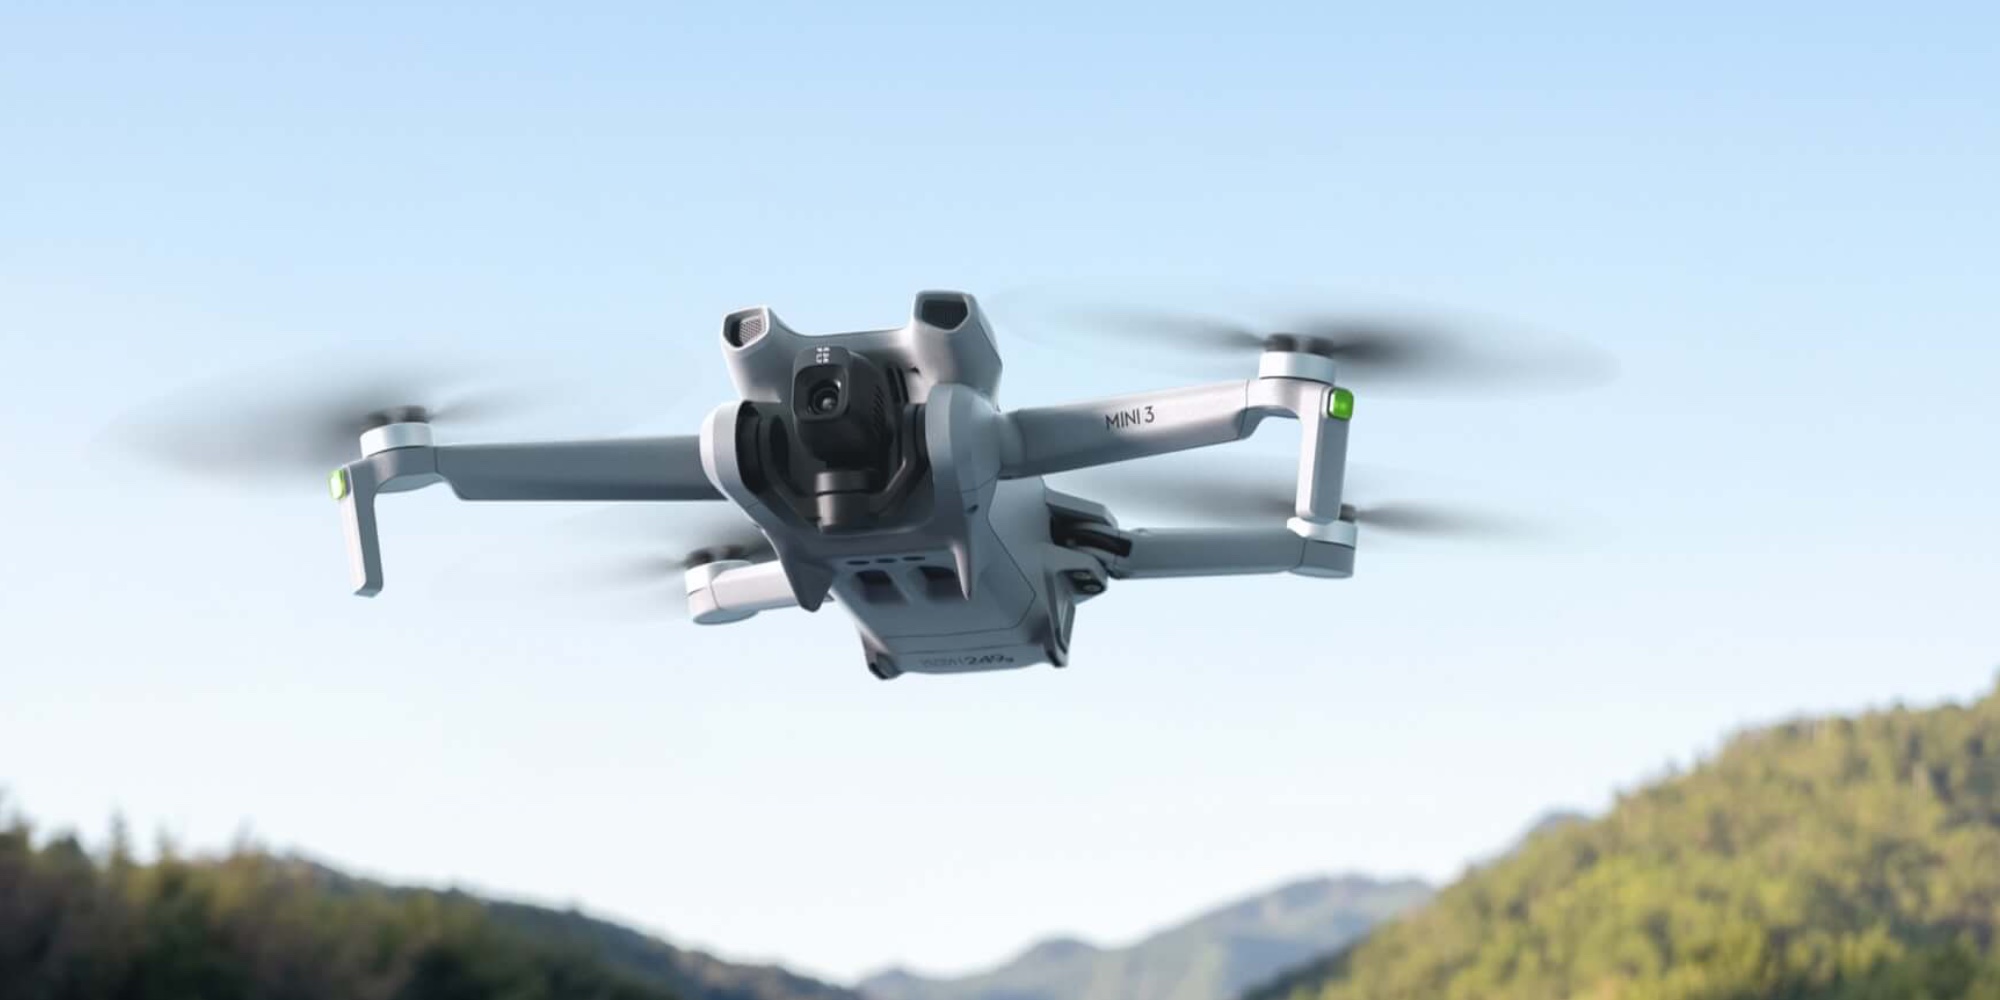 DJI launches the Mini SE drone: What to know